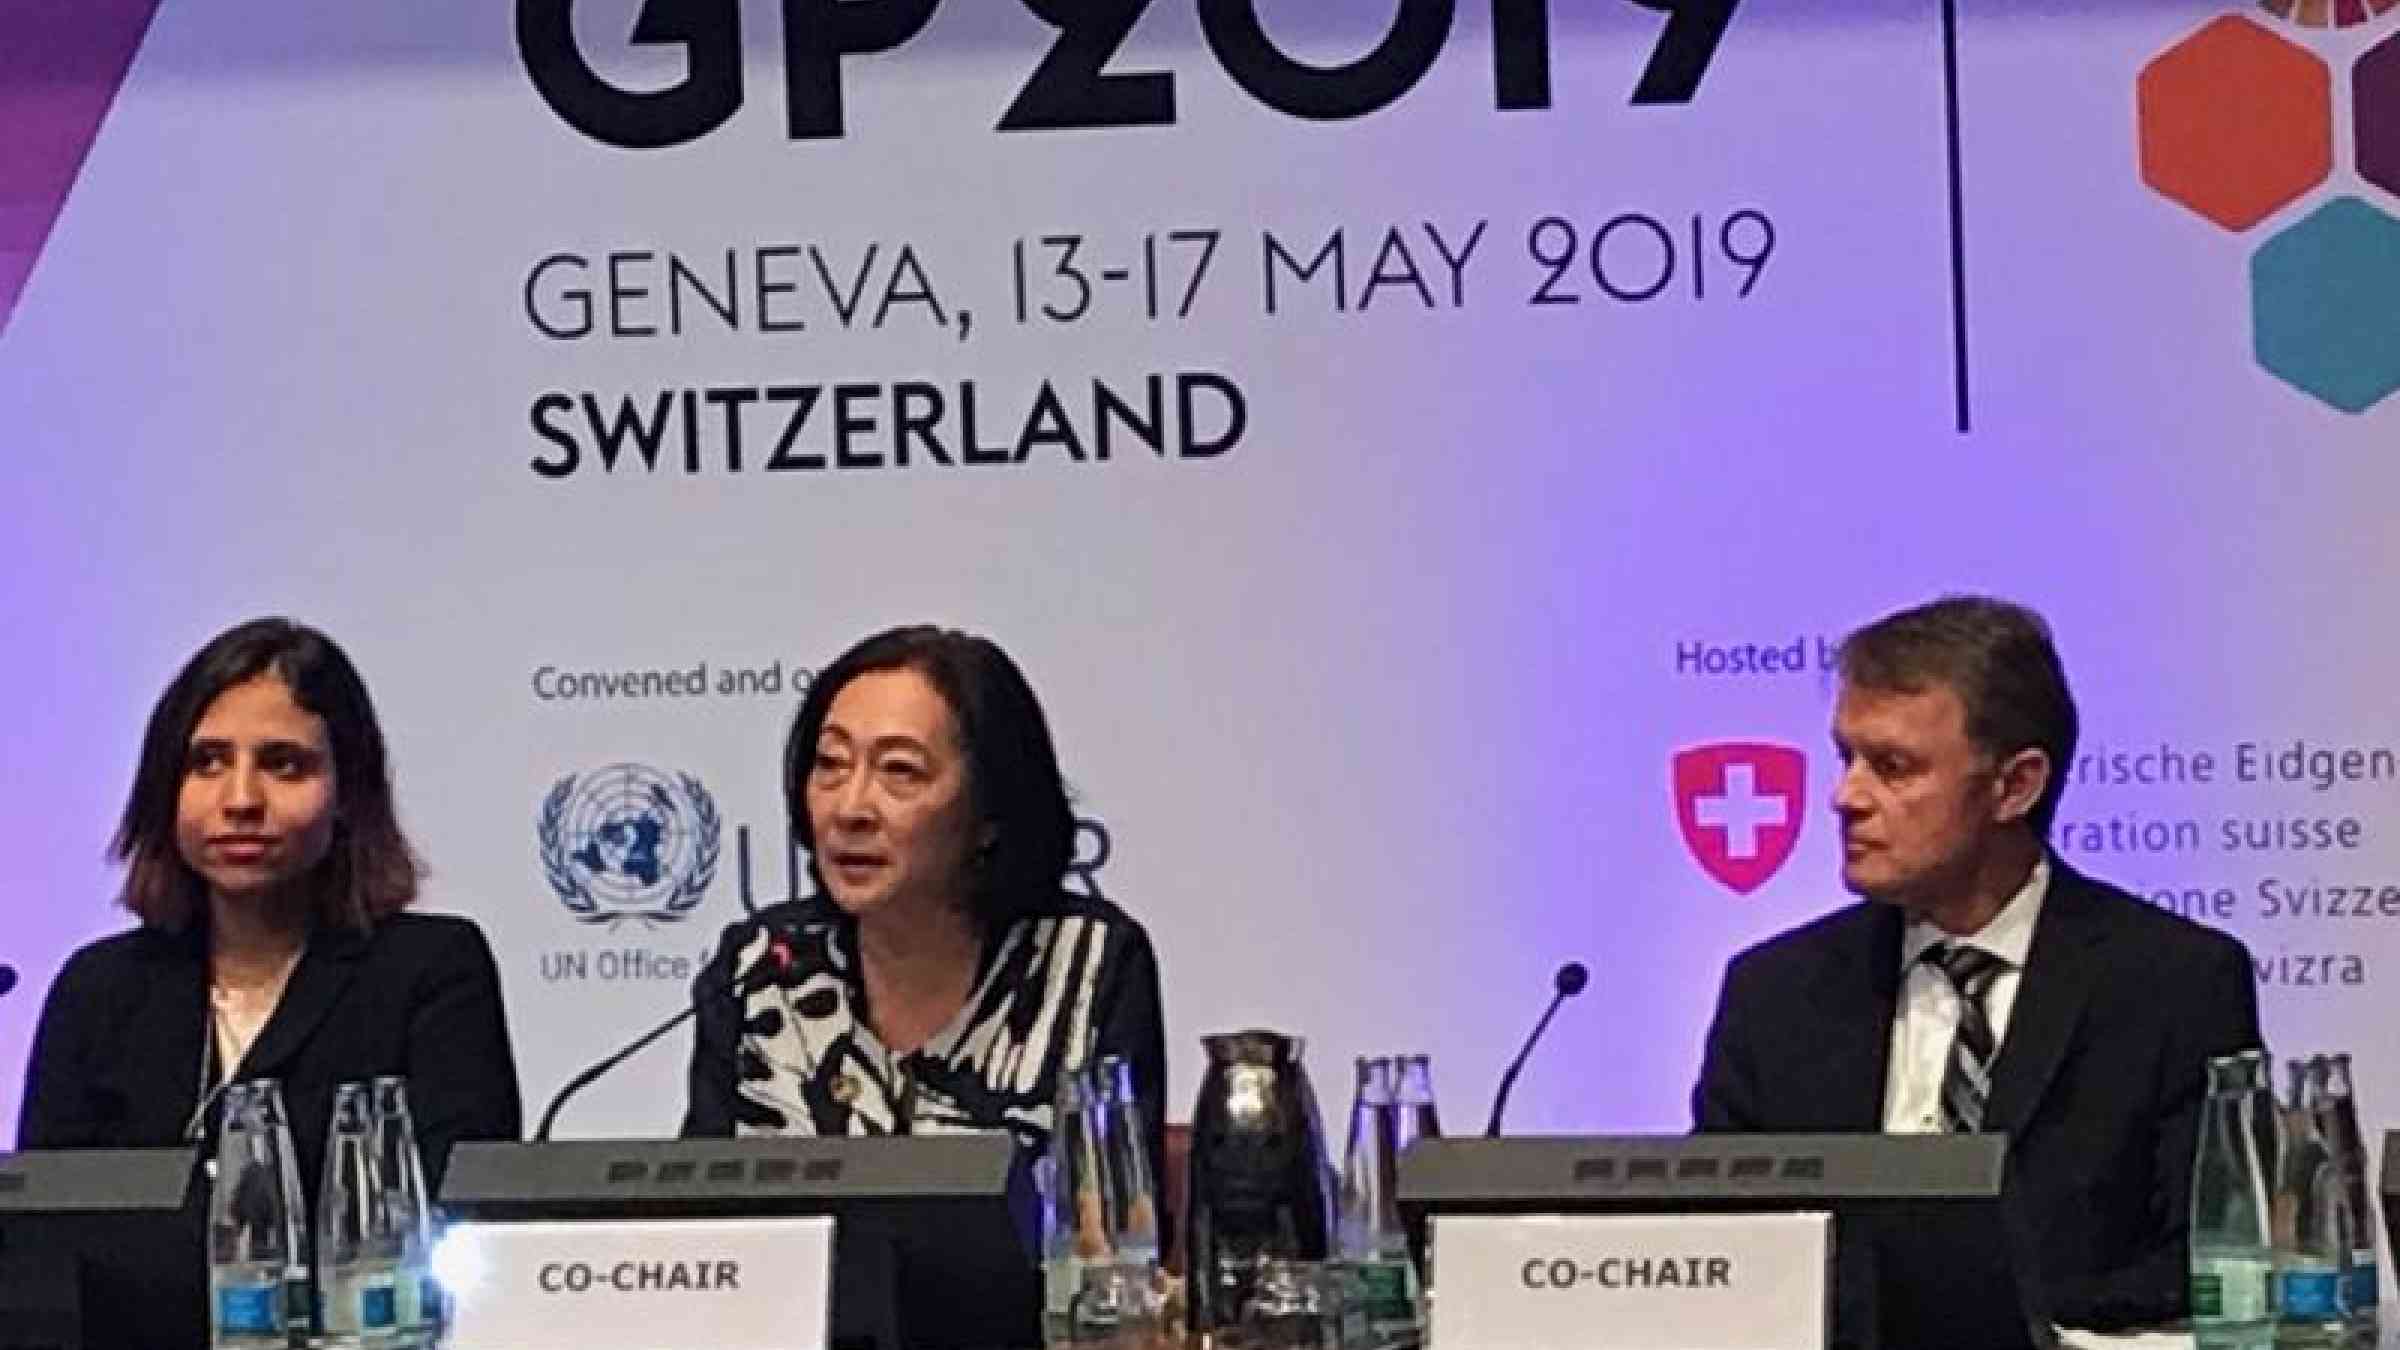 At the closing ceremony of the Global Platform, Marwa Elmenshawy, Stakeholder Engagement Mechanism, and Global Platform co-chairs, Mami Mizutori, UNDRR, and Manuel Sager, Secretary of State, Switzerland.